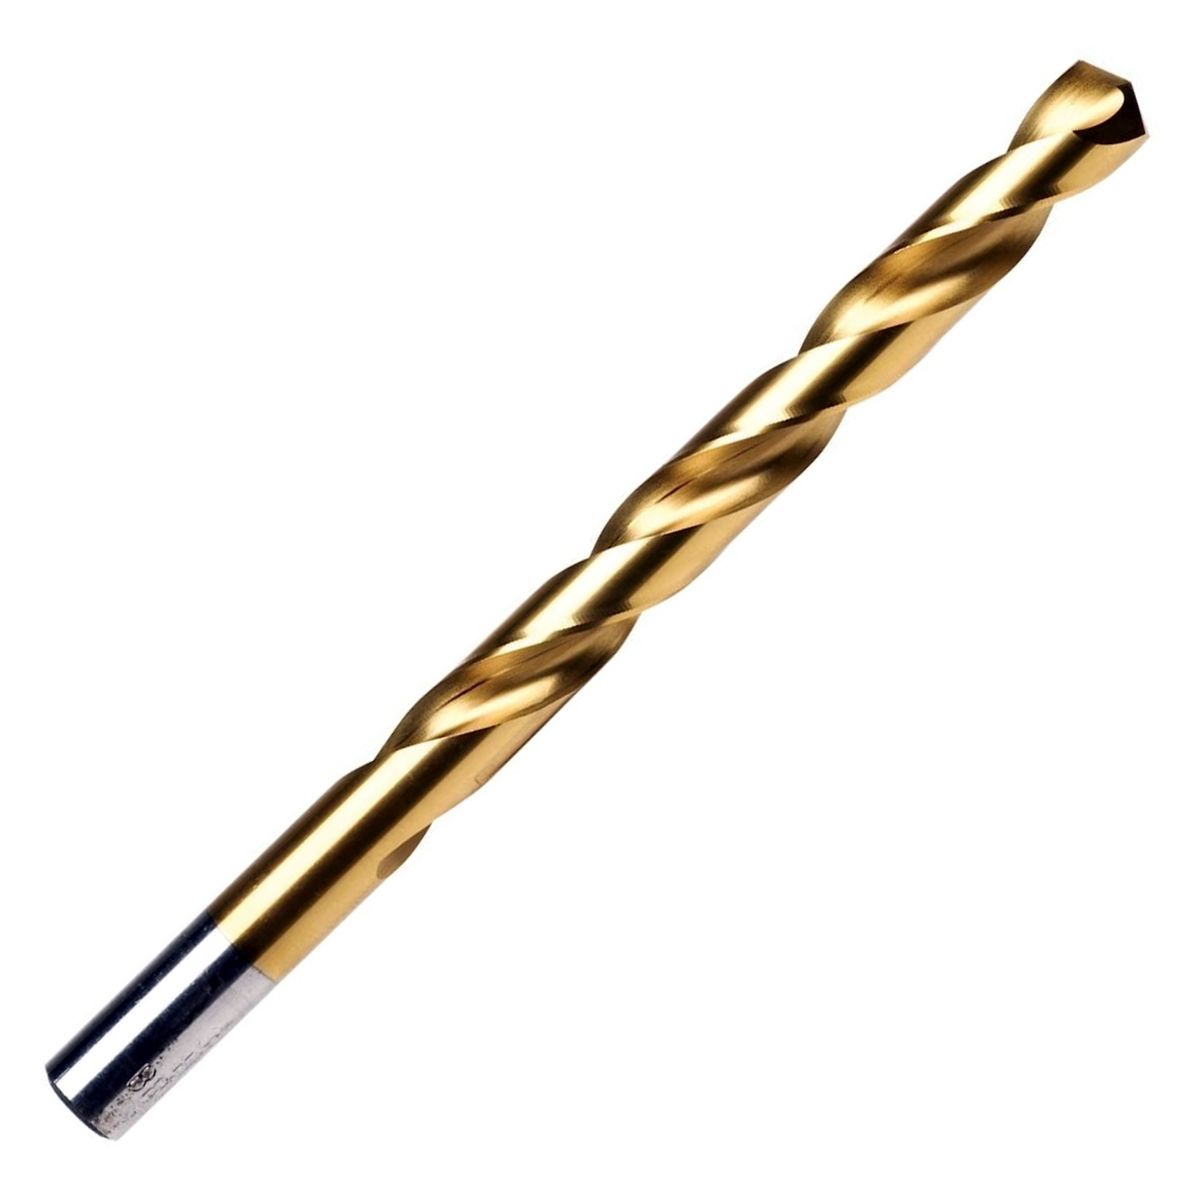 Turbomax Drill Bit - 5/16In - Carded